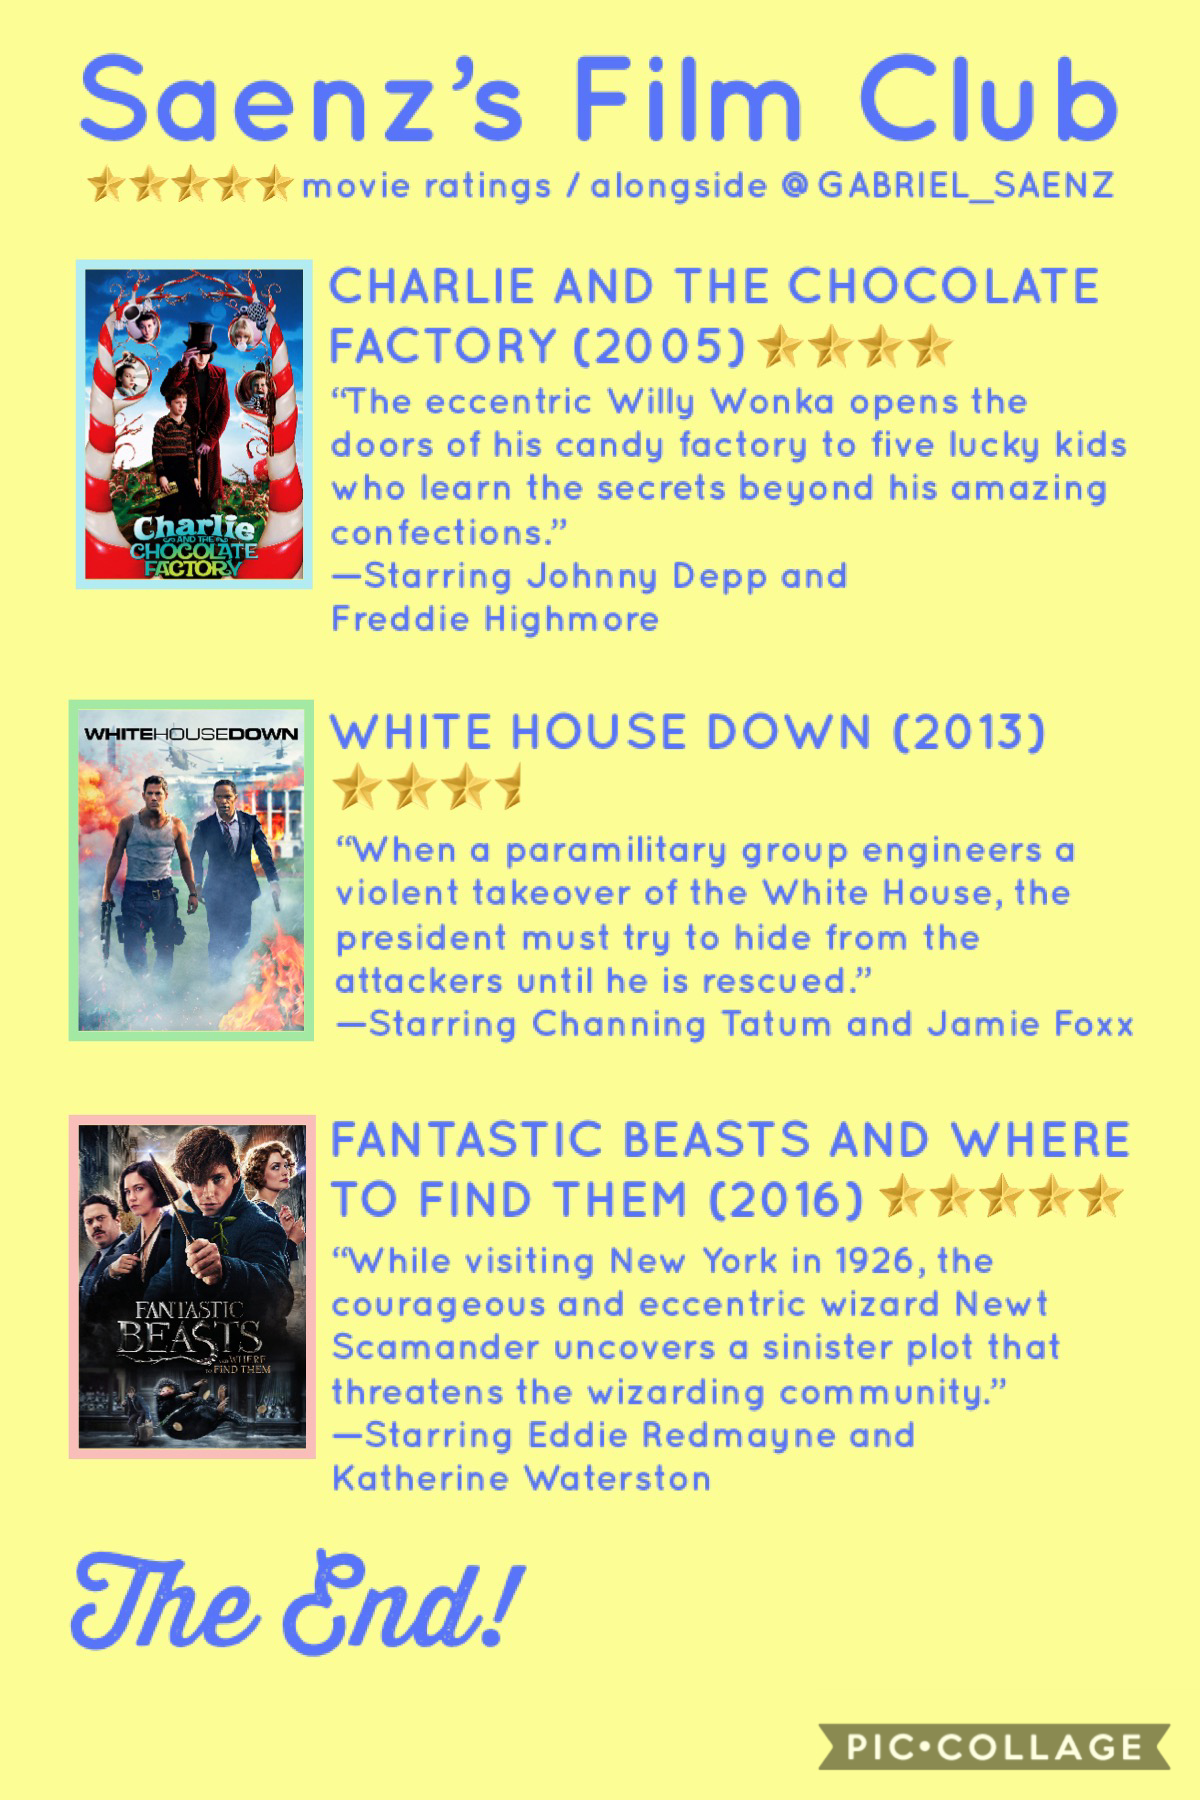 good morning, guys 😍 at last, the revival of this segment after it being reformatted 🤧🍓 here’s some recent movies i’ve watched with gabriel this week—have you seen all/any of these? how would you rate them? 🤩 